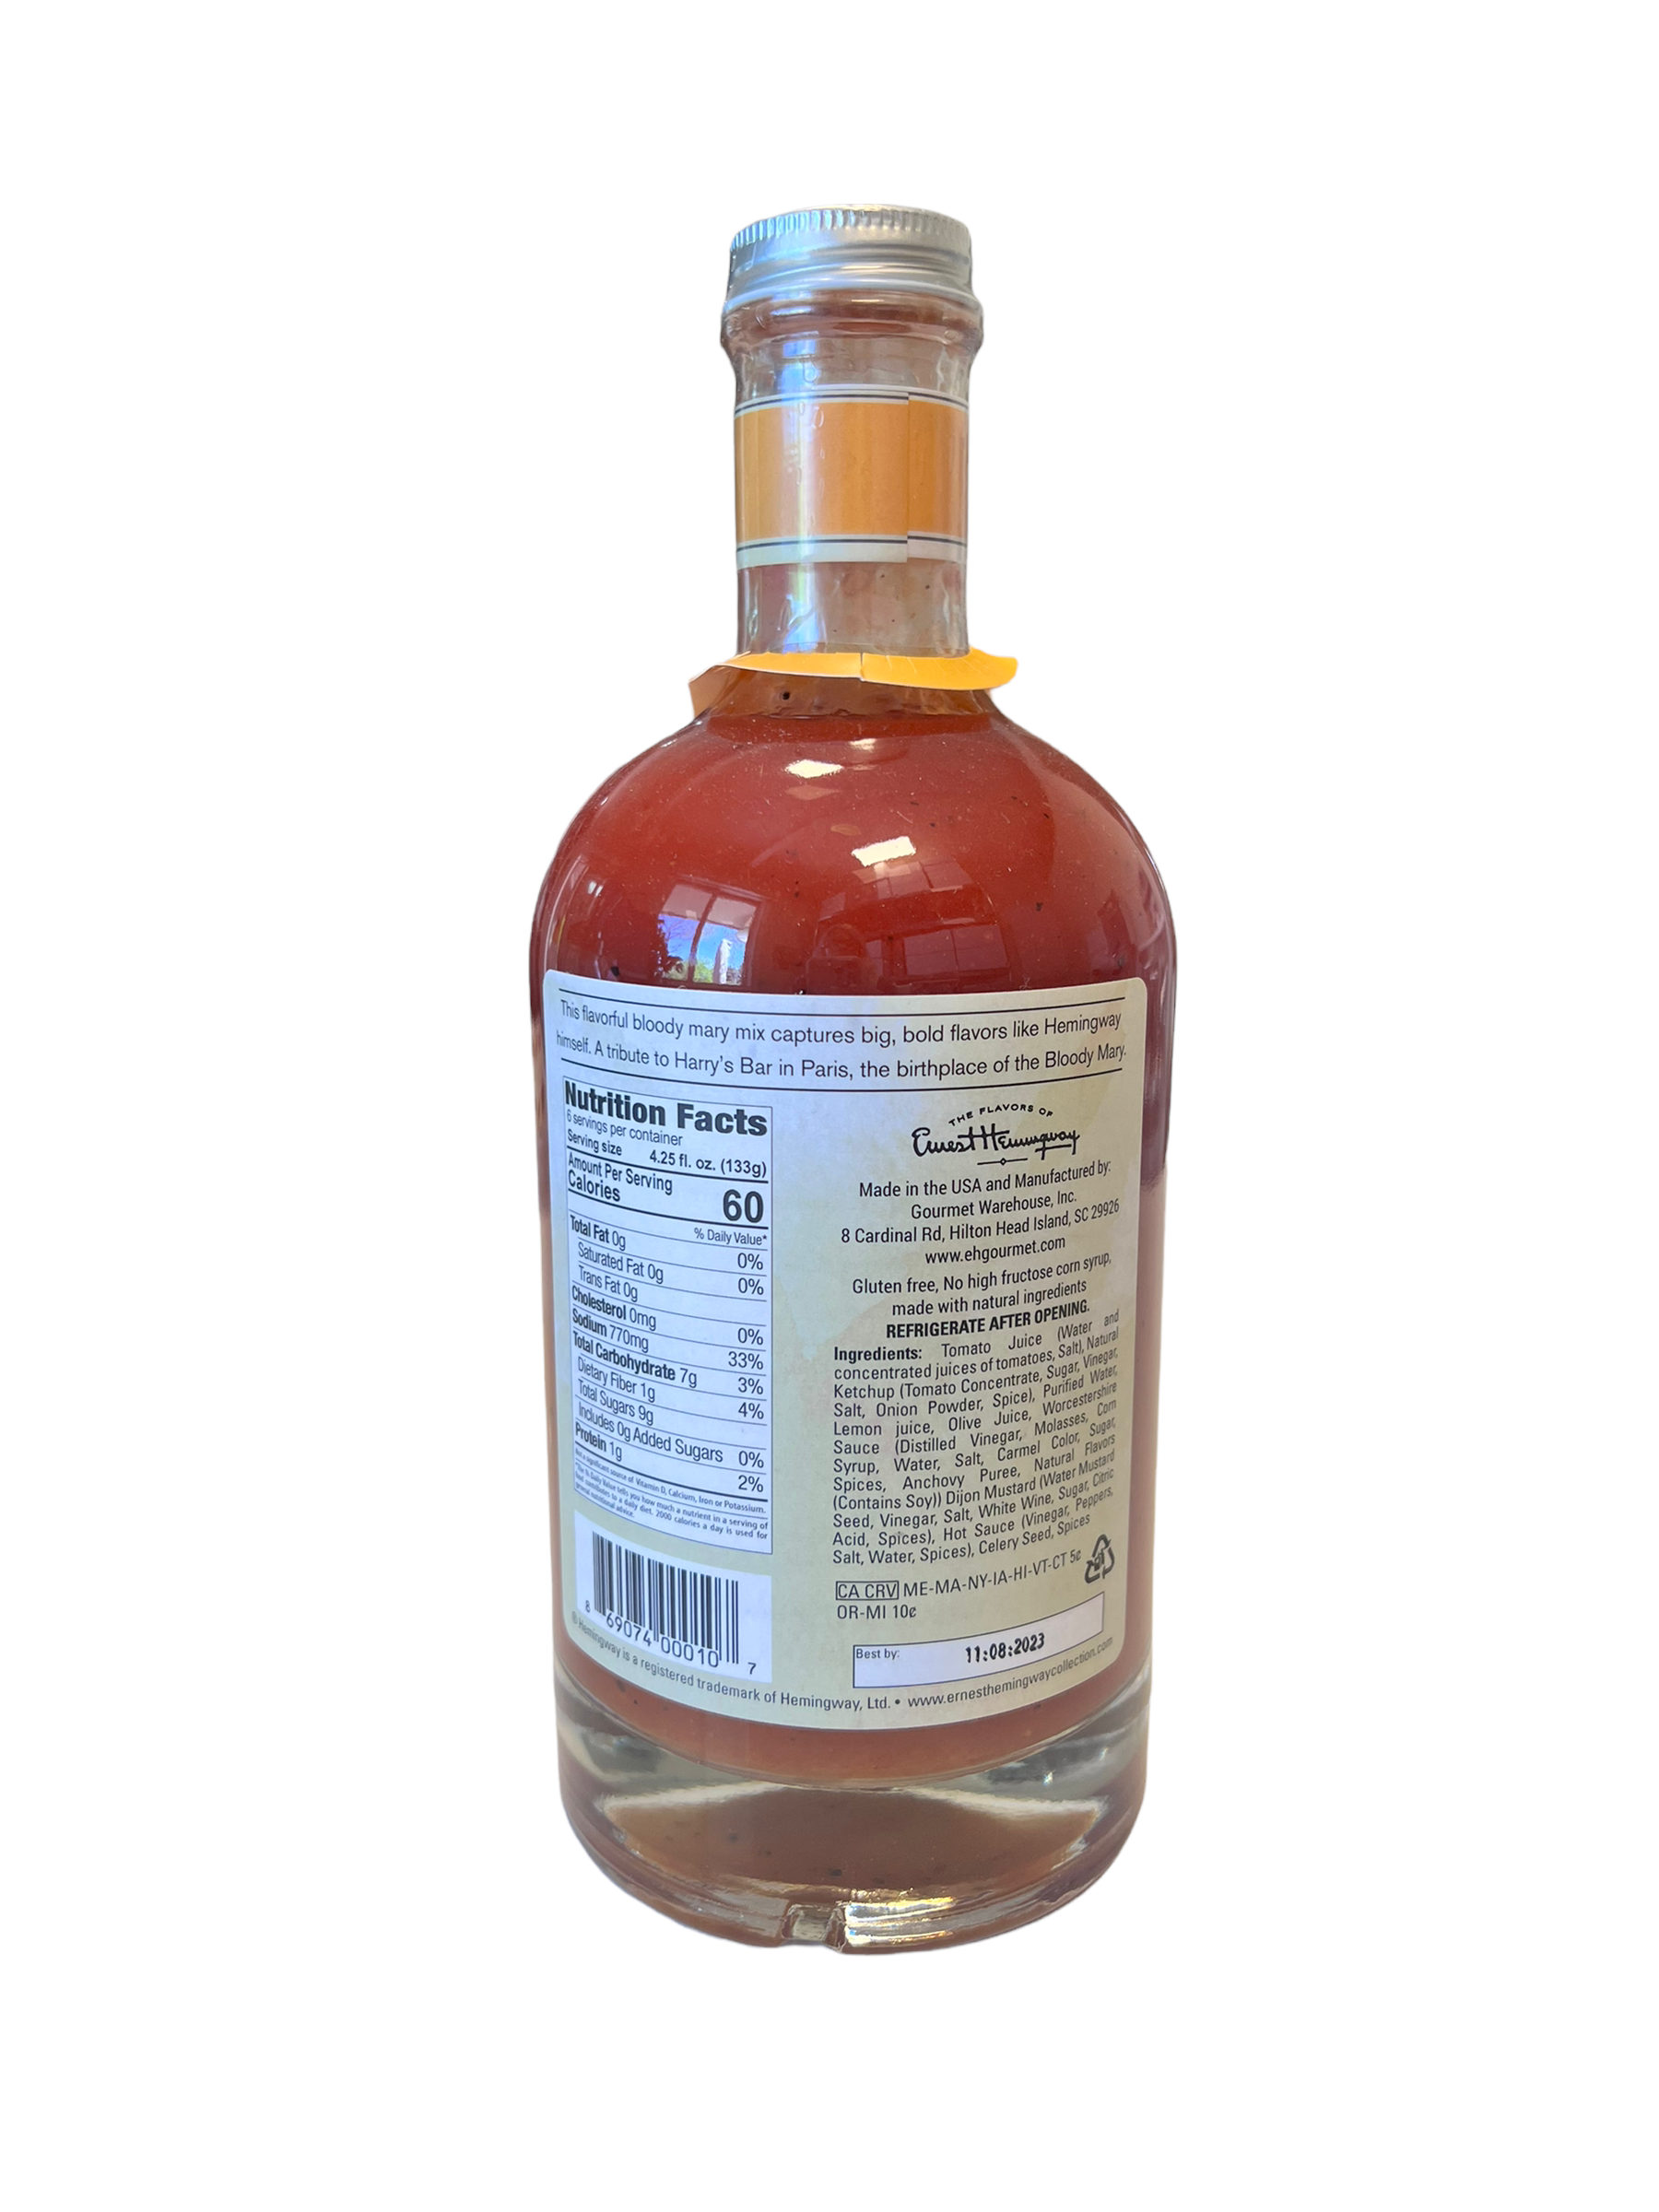 Gourmet Warehouse Ernest Hemmingway Bloody Mary Mix back label ingredients